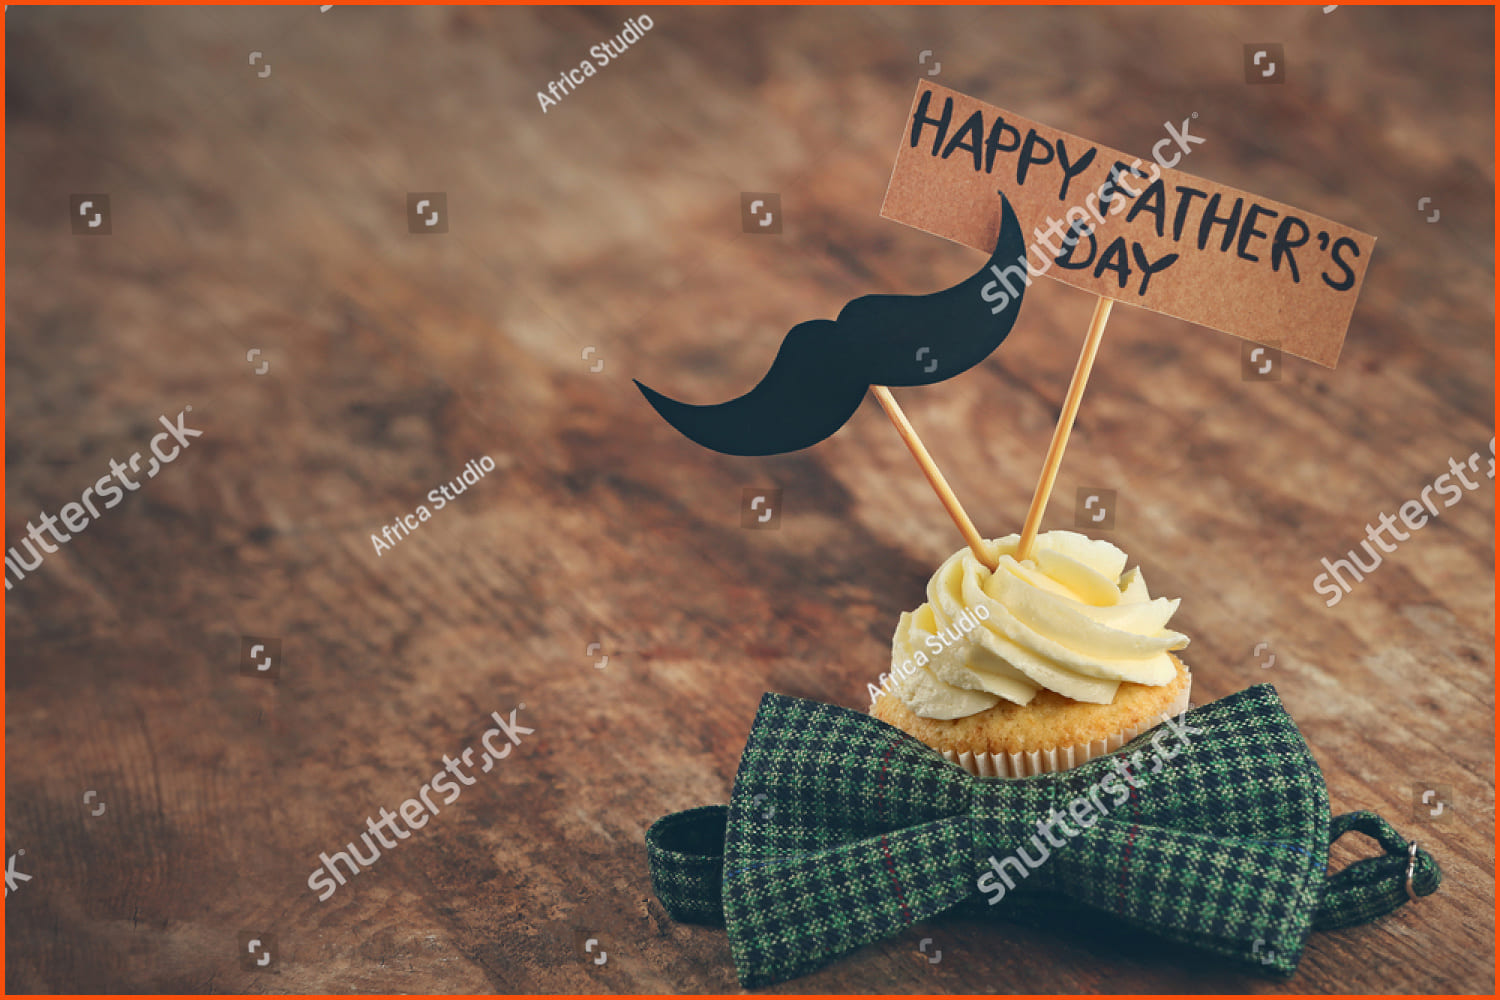 Happy fathers day special cupcake and tie on wooden table.